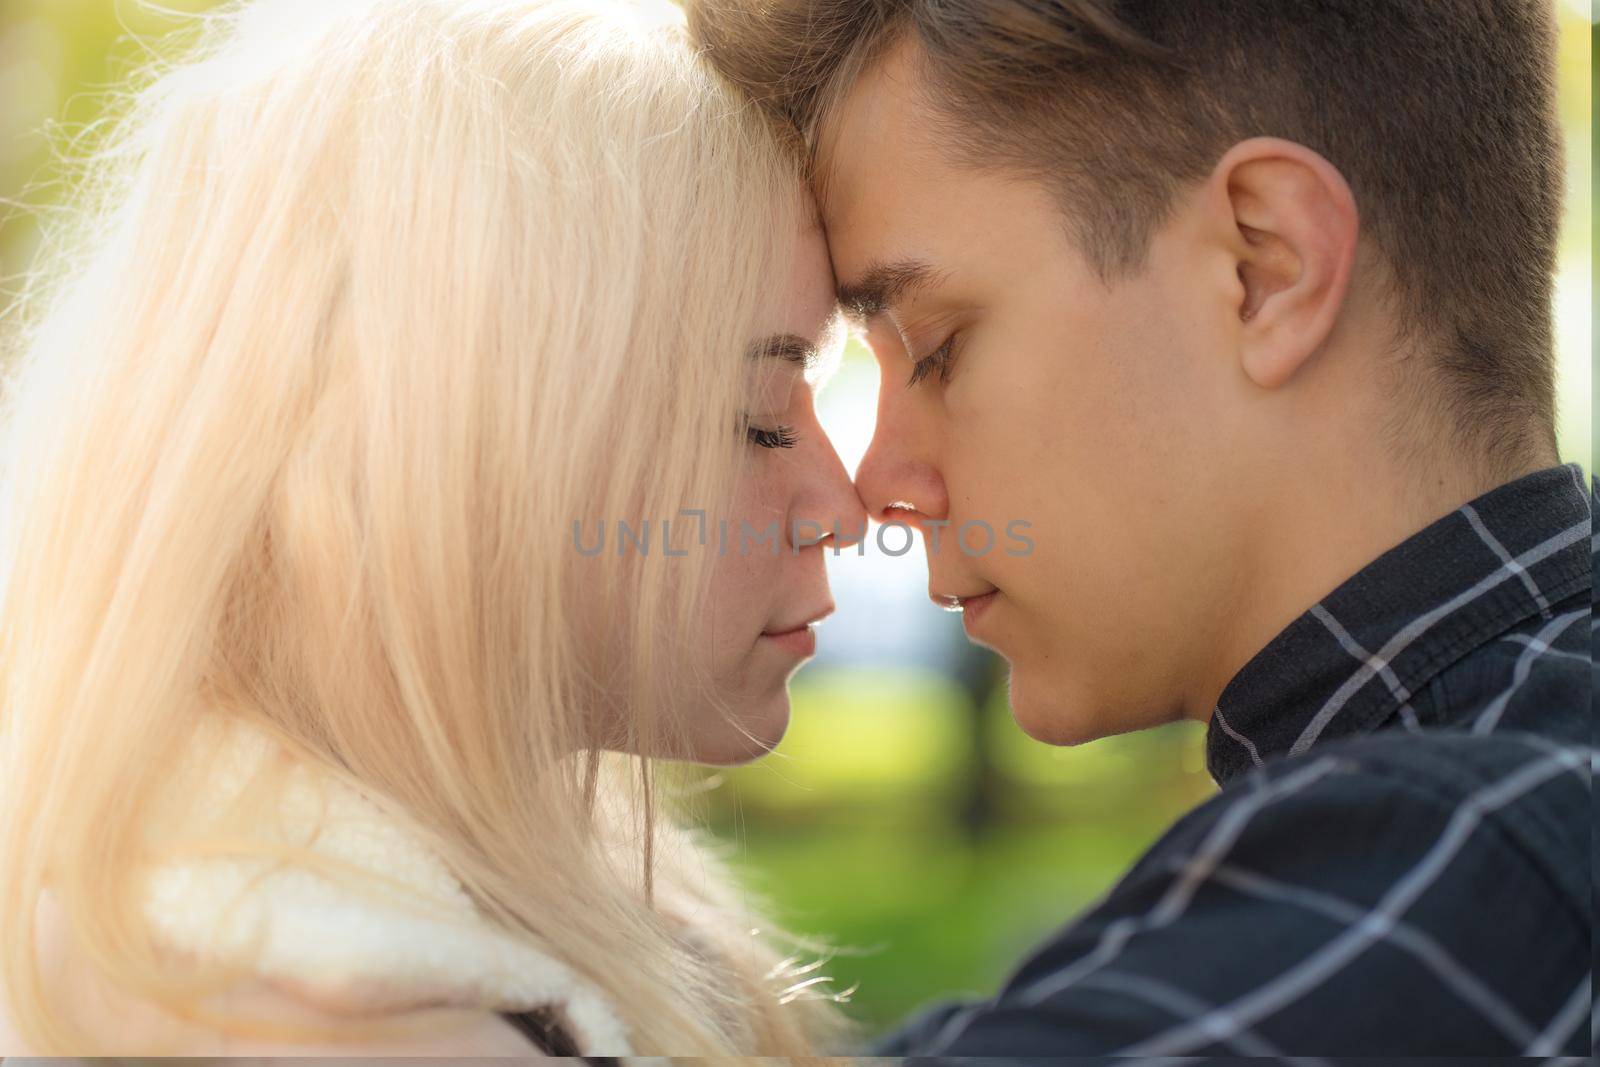 A man affectionately call looks at woman, guy and girl are worth close, touching the tips noses. The concept of first teenage love and a first kiss. Boy and girl, couple. Intimacy, honesty, trust, open feelings. Close up portrait.